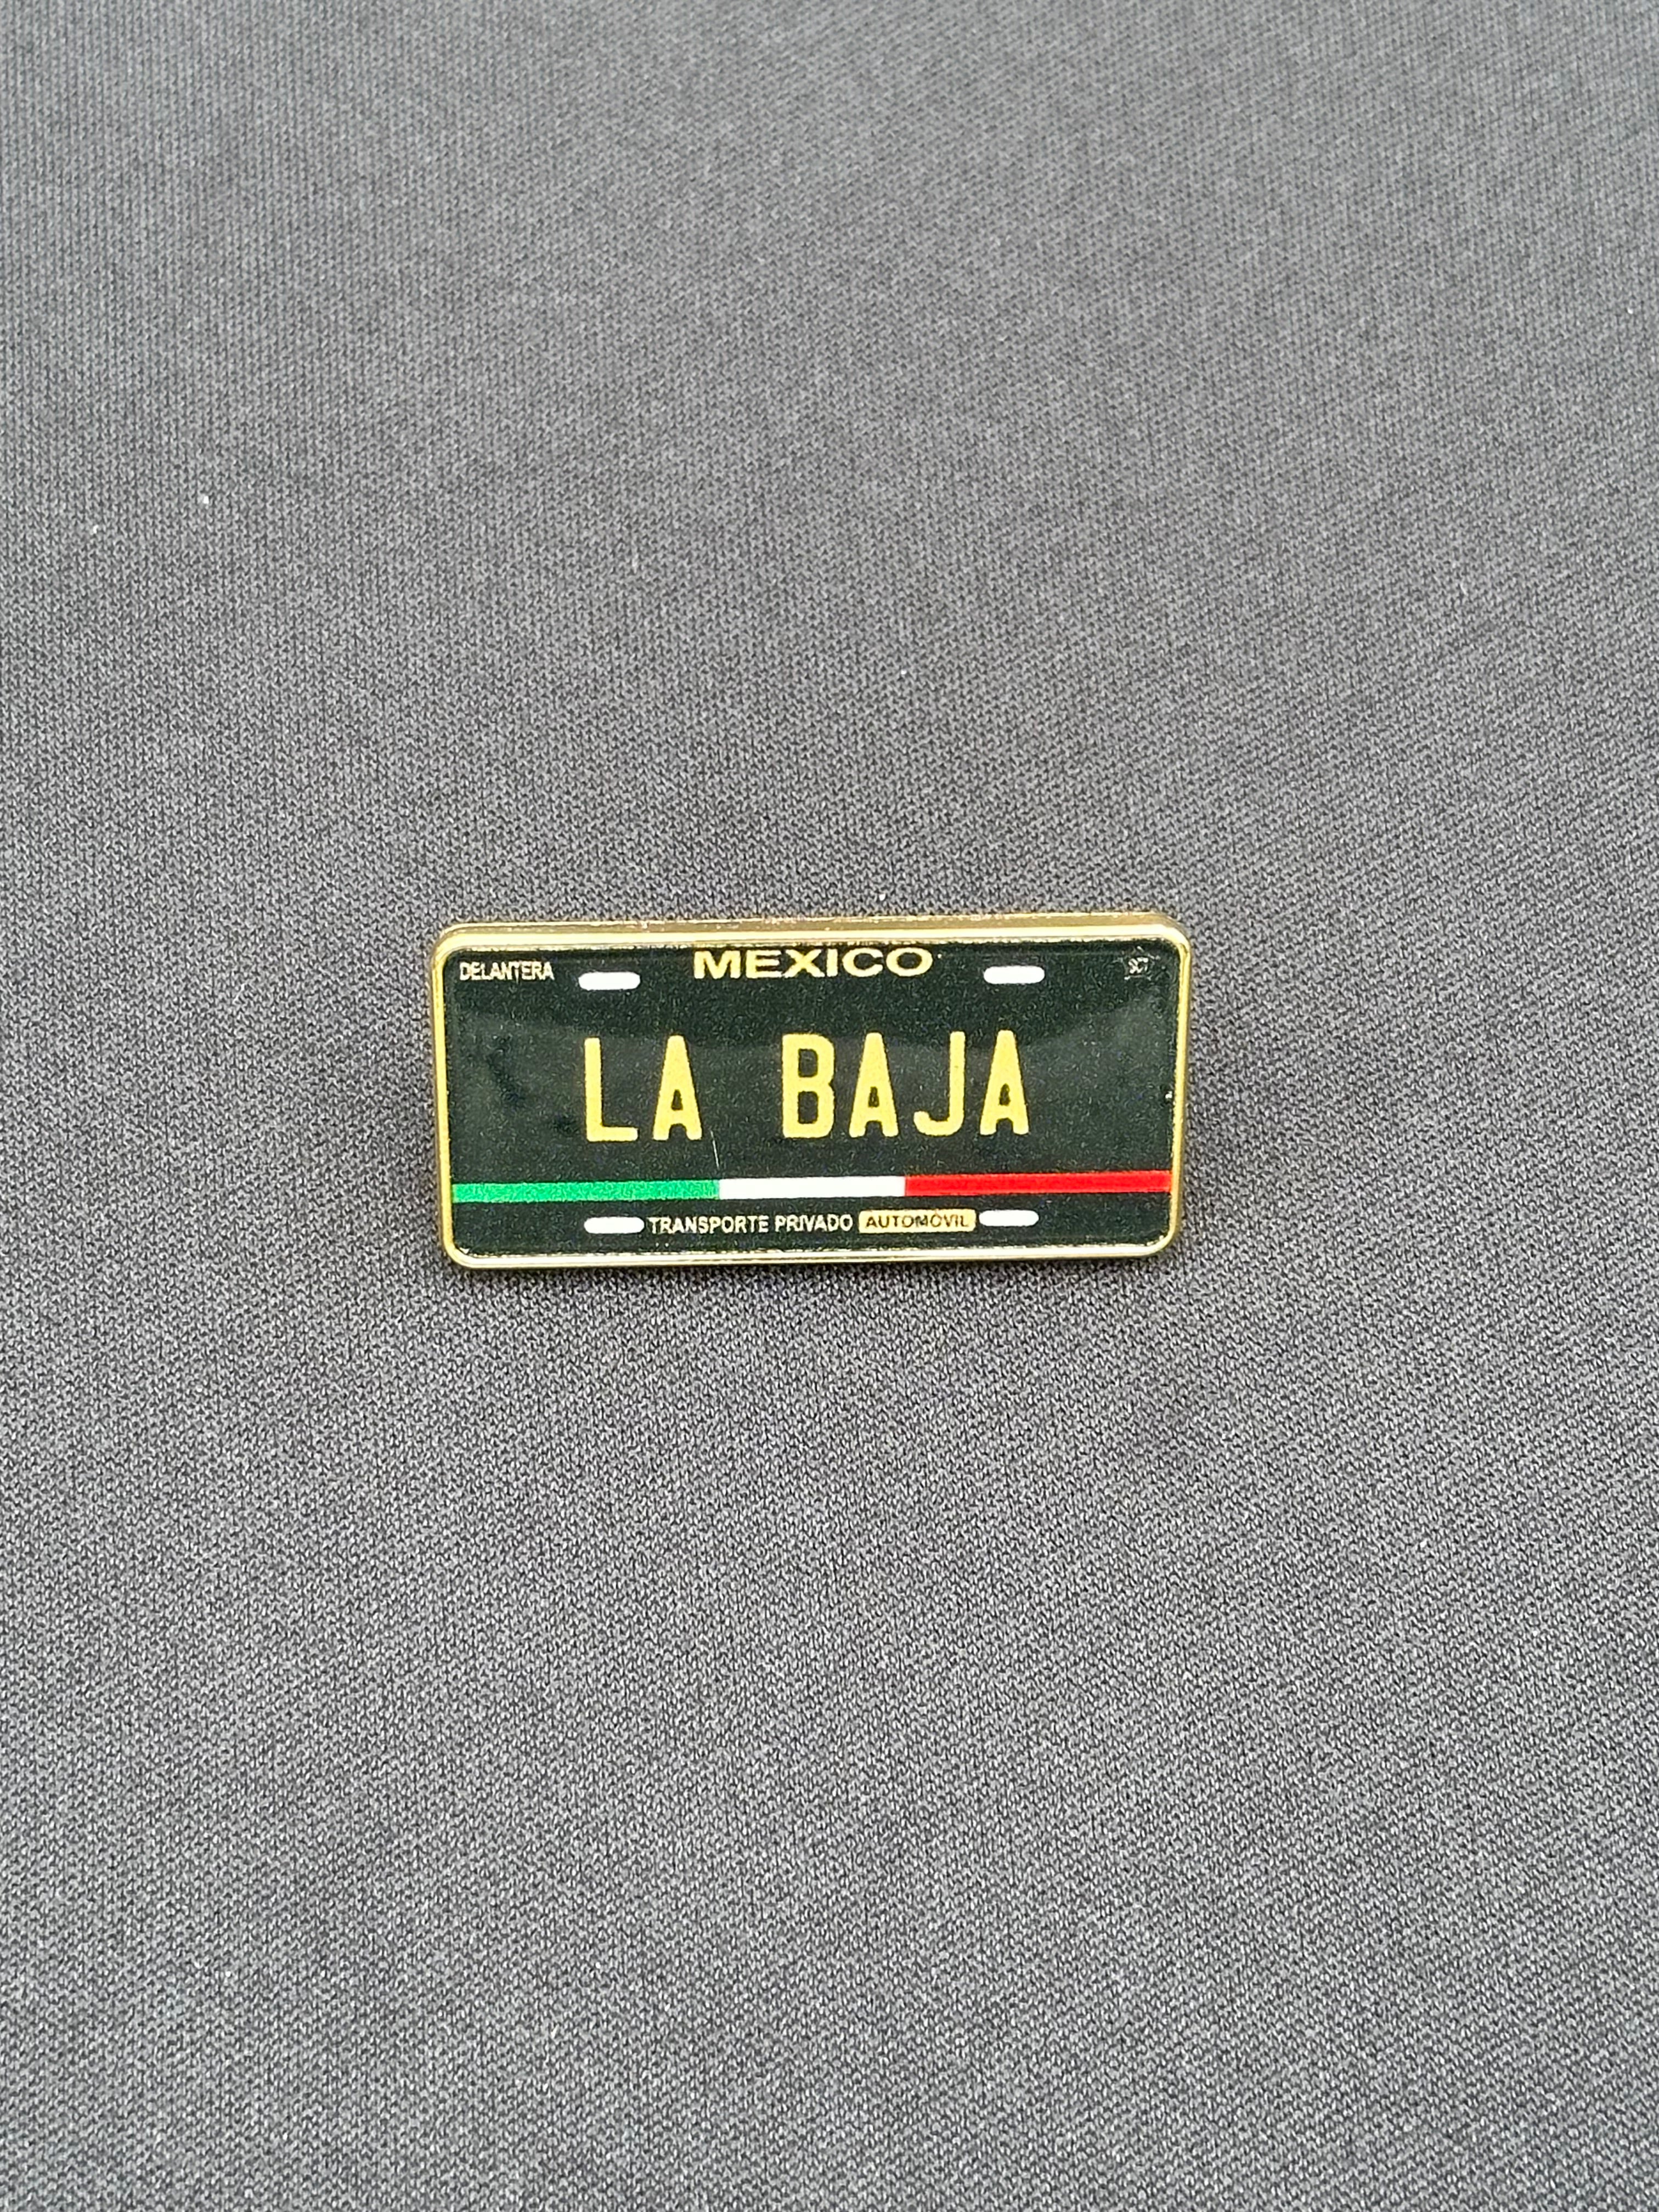 *NEW BLACK "LA BAJA" EXCLUSIVE LICENSE PLATE PIN VERY LIMITED